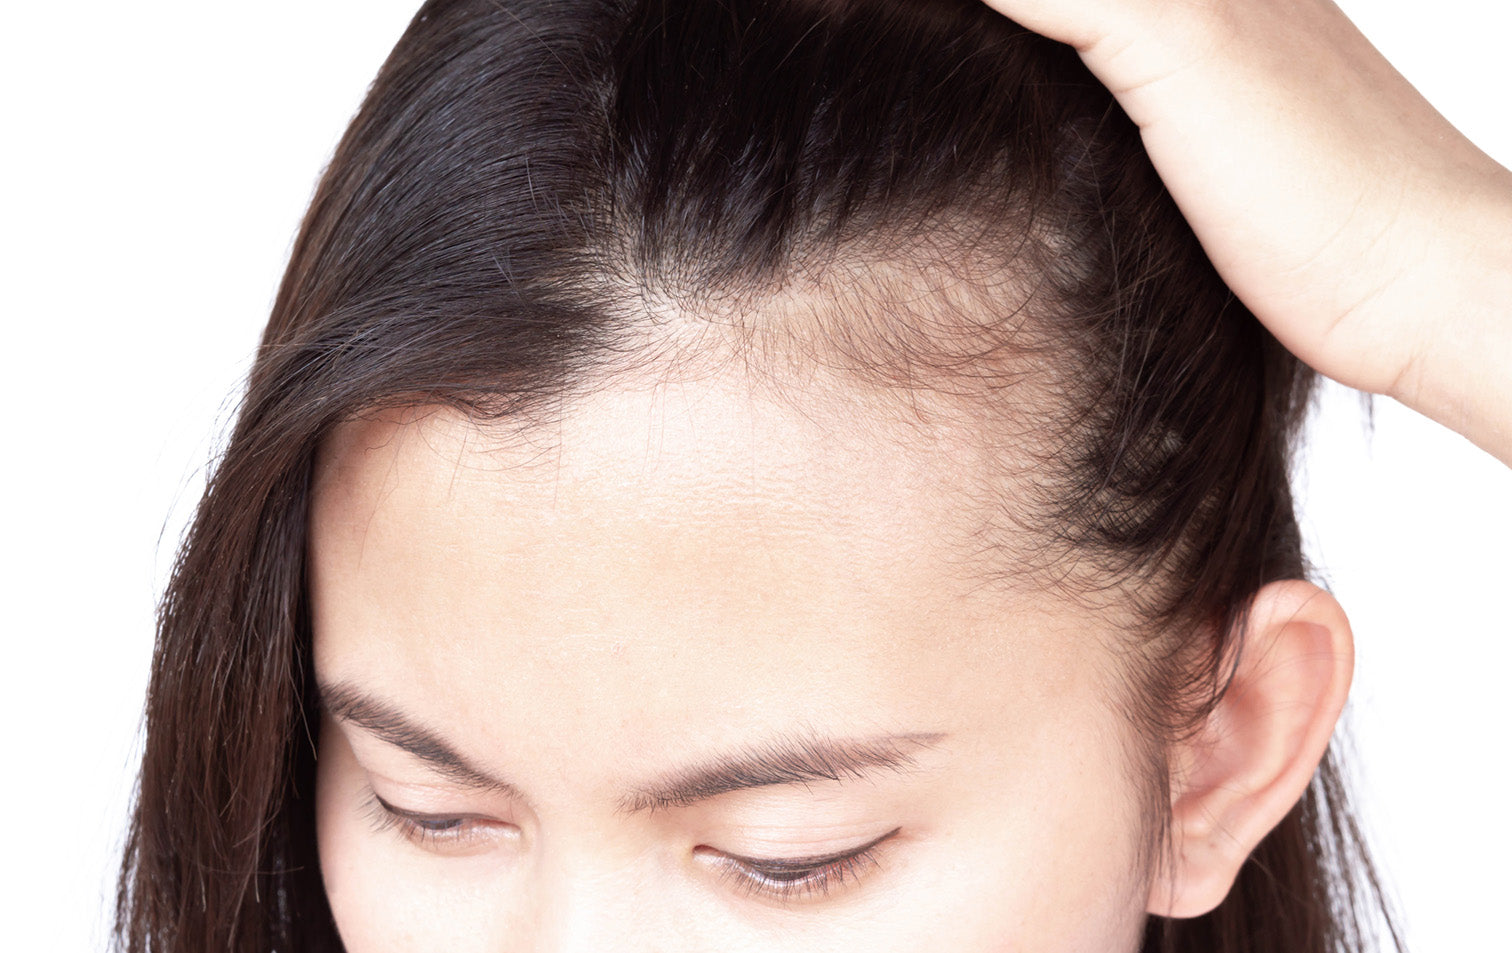 When You See These Early Signs of Hair Loss, Act Fast